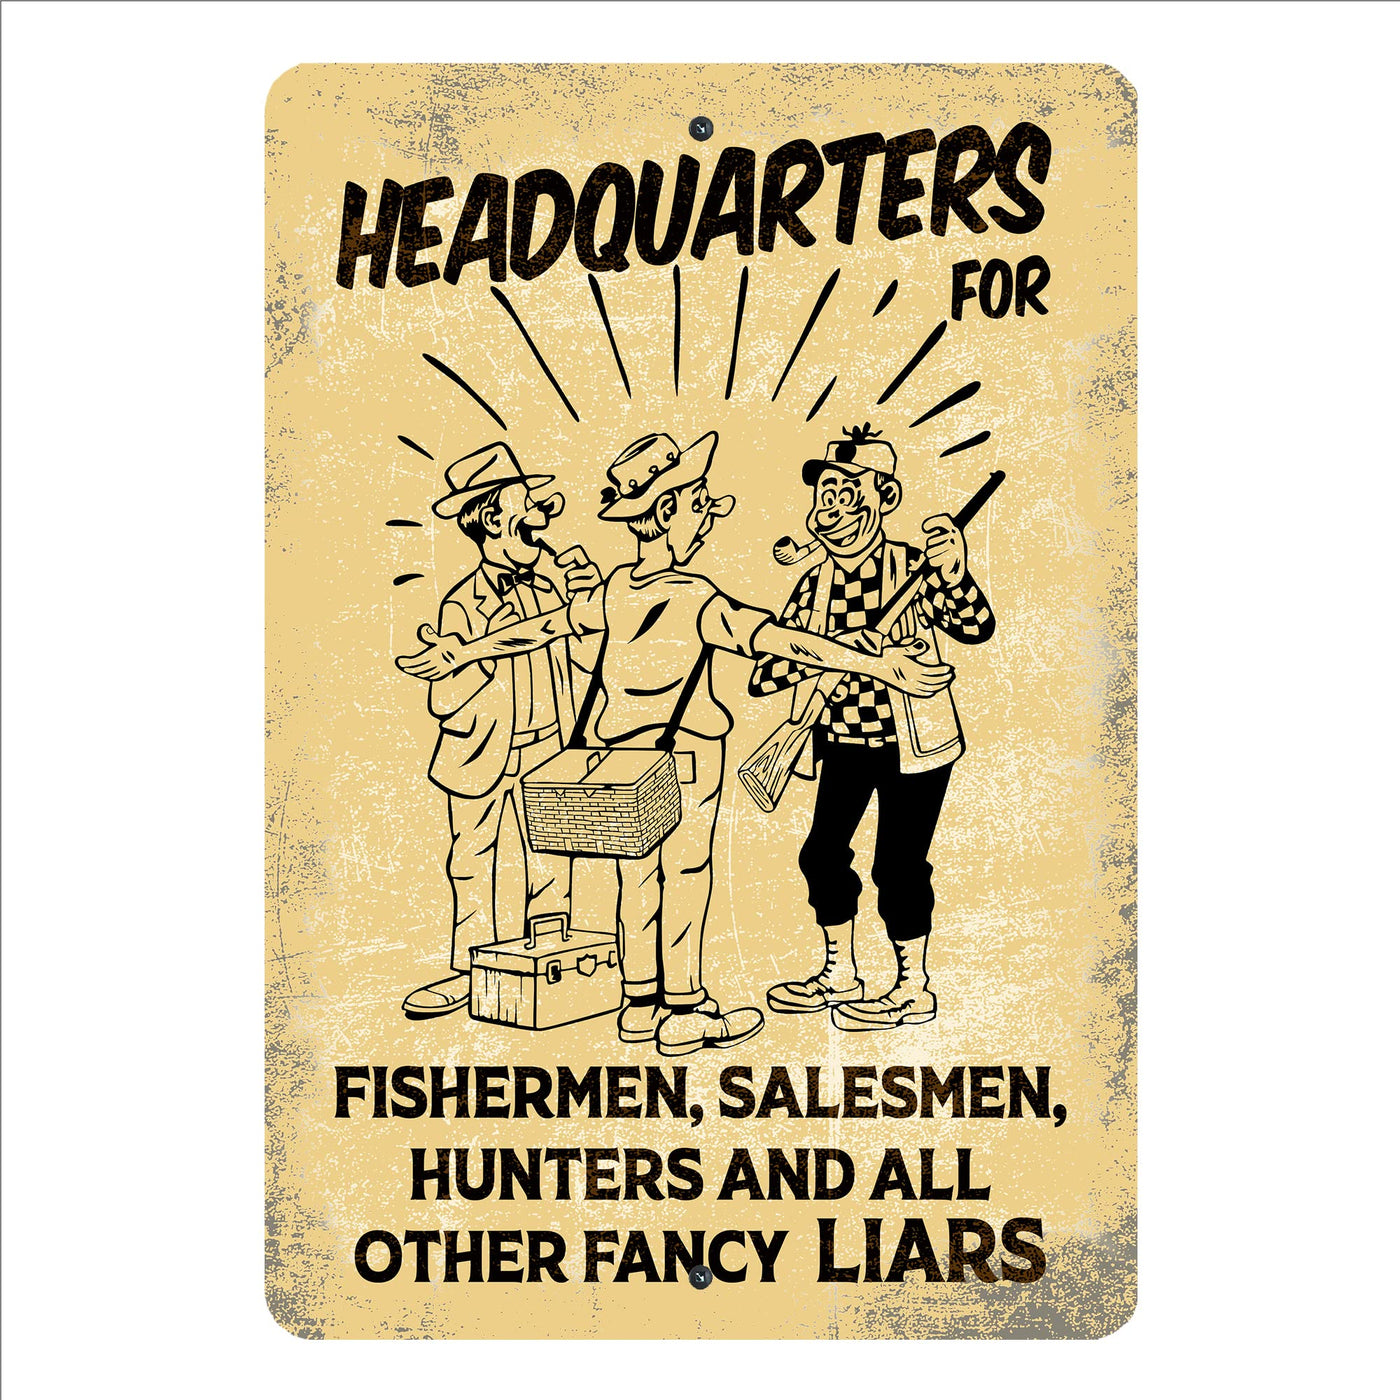 Headquarters for Fisherman, Hunters, Other Liars Metal Signs Vintage Wall Art -8 x 12" Funny Rustic Sign for Lake House, Cabin, Patio, Lodge - Tin Sign Decor for Home-Man Cave Accessories & Gifts!